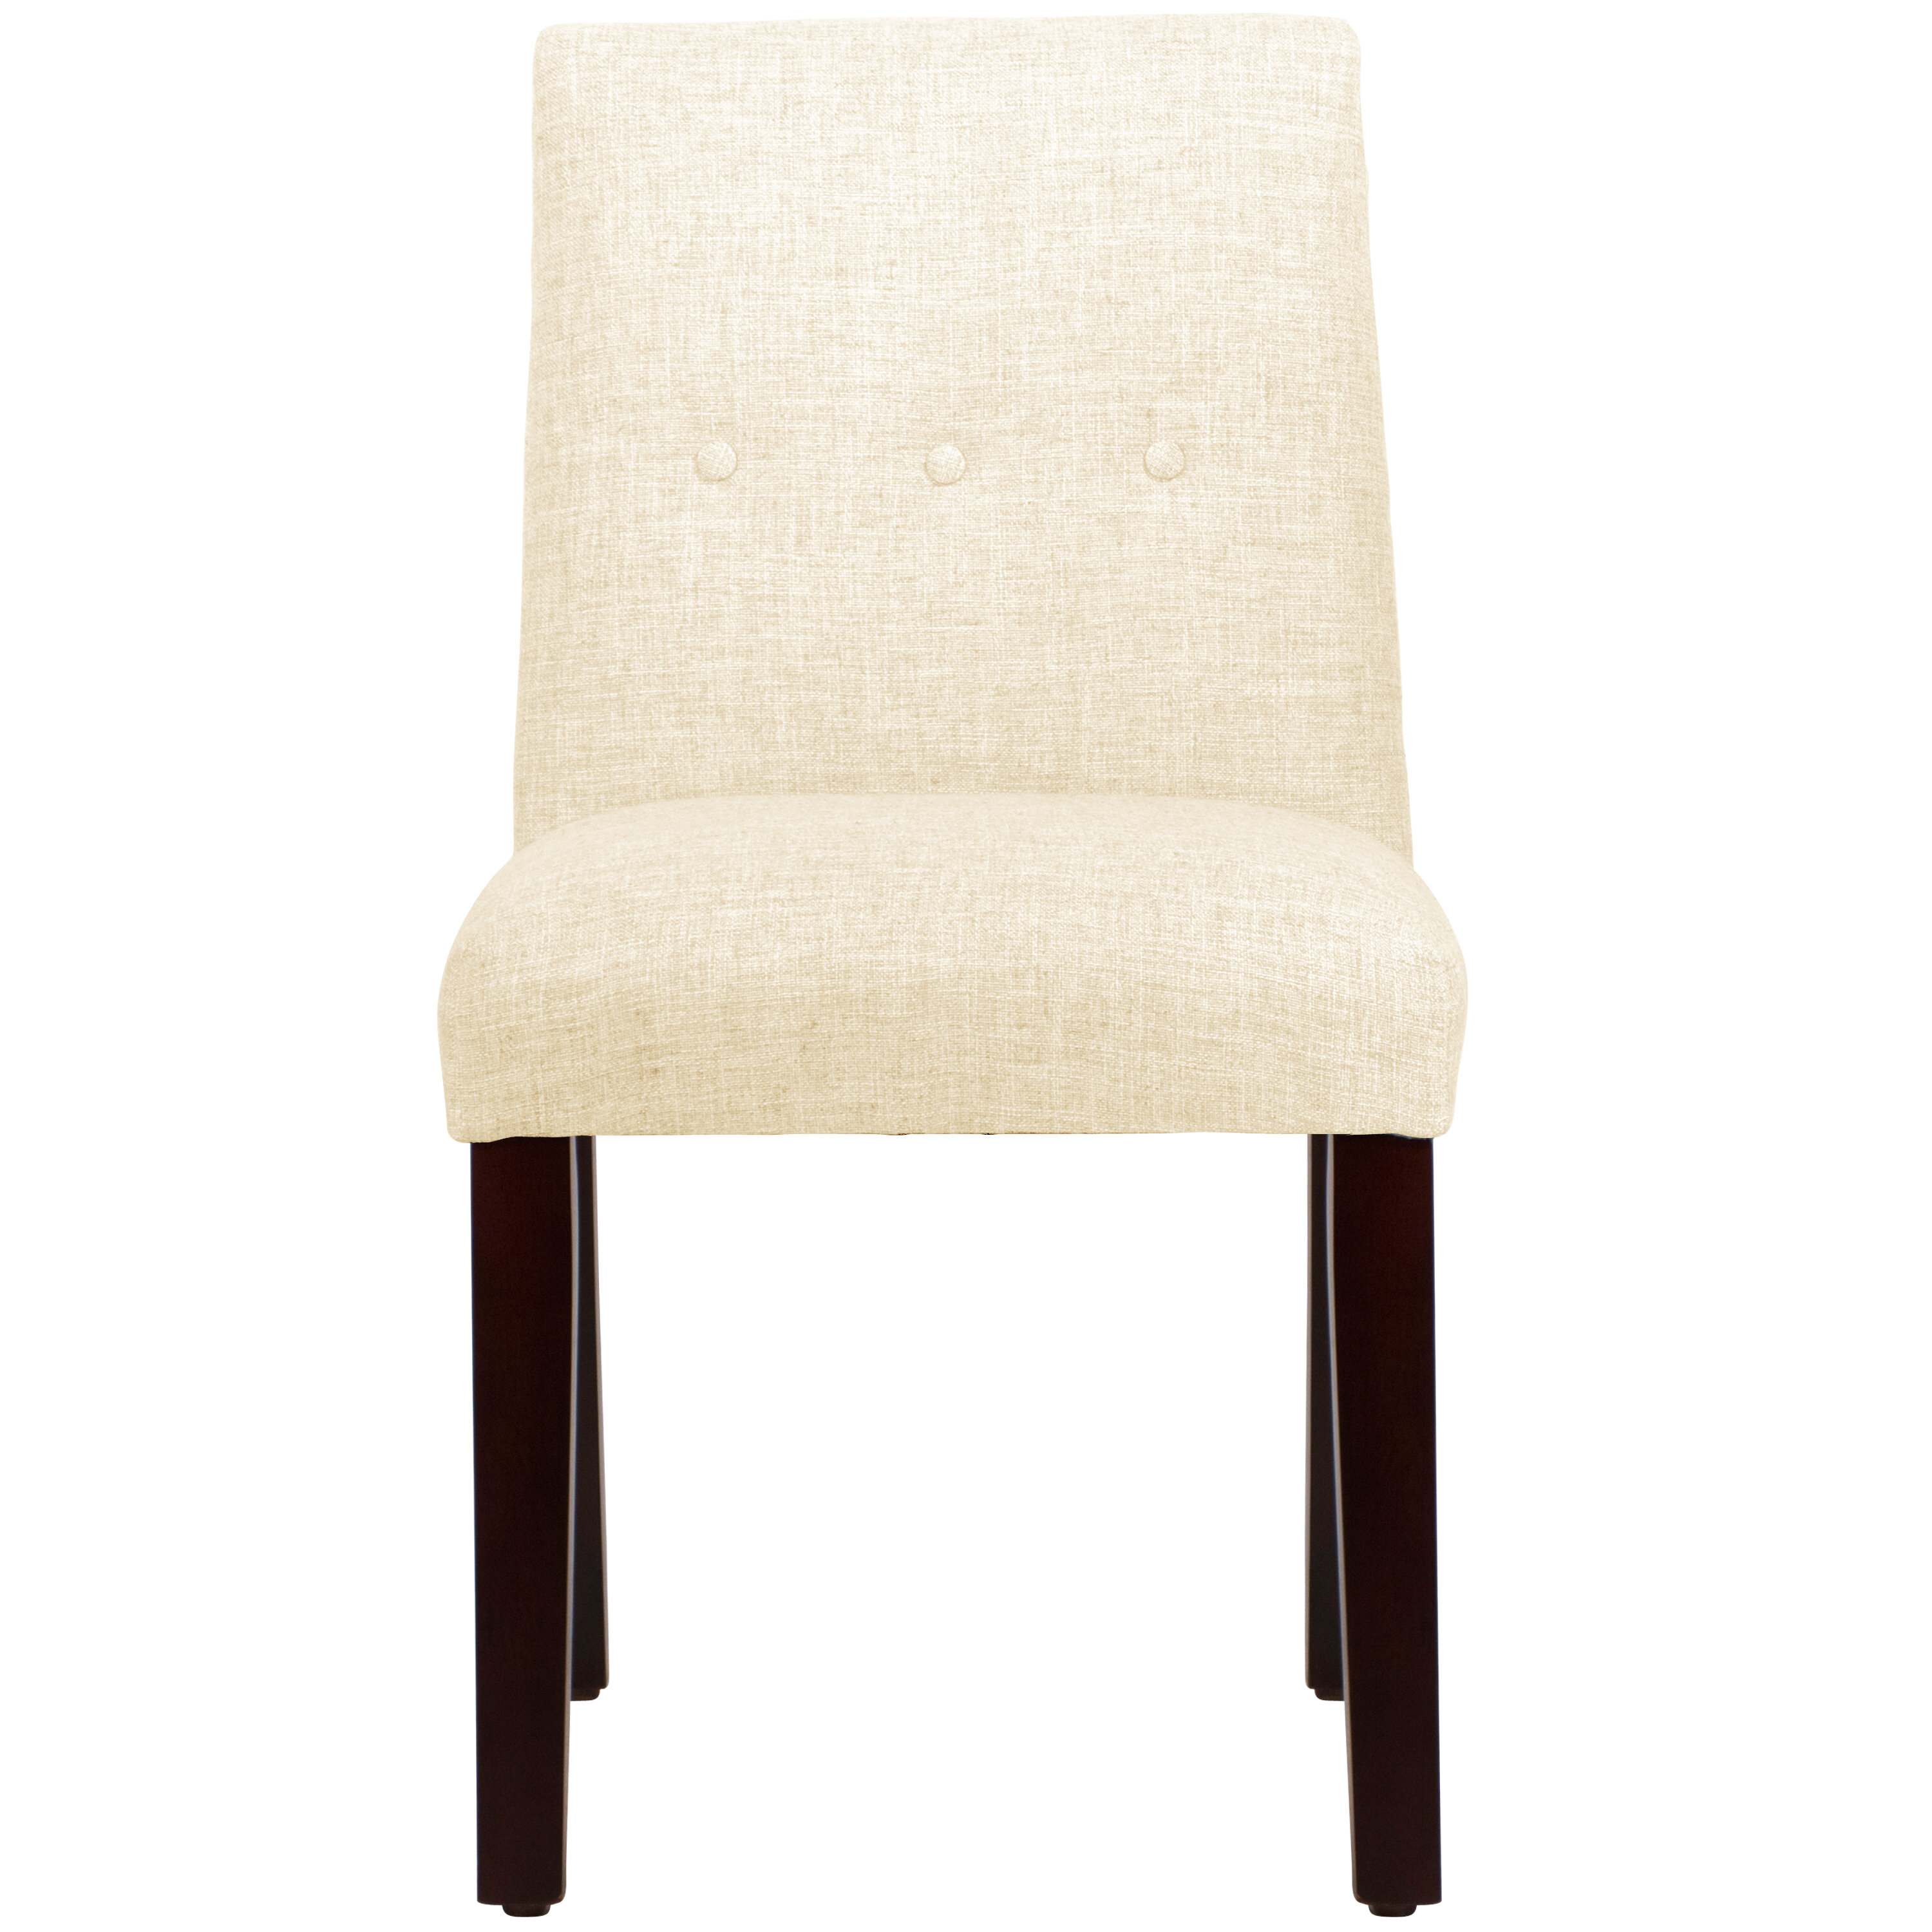 How Much Upholstery Fabric Do I Need For A Dining Chair - Upholstery